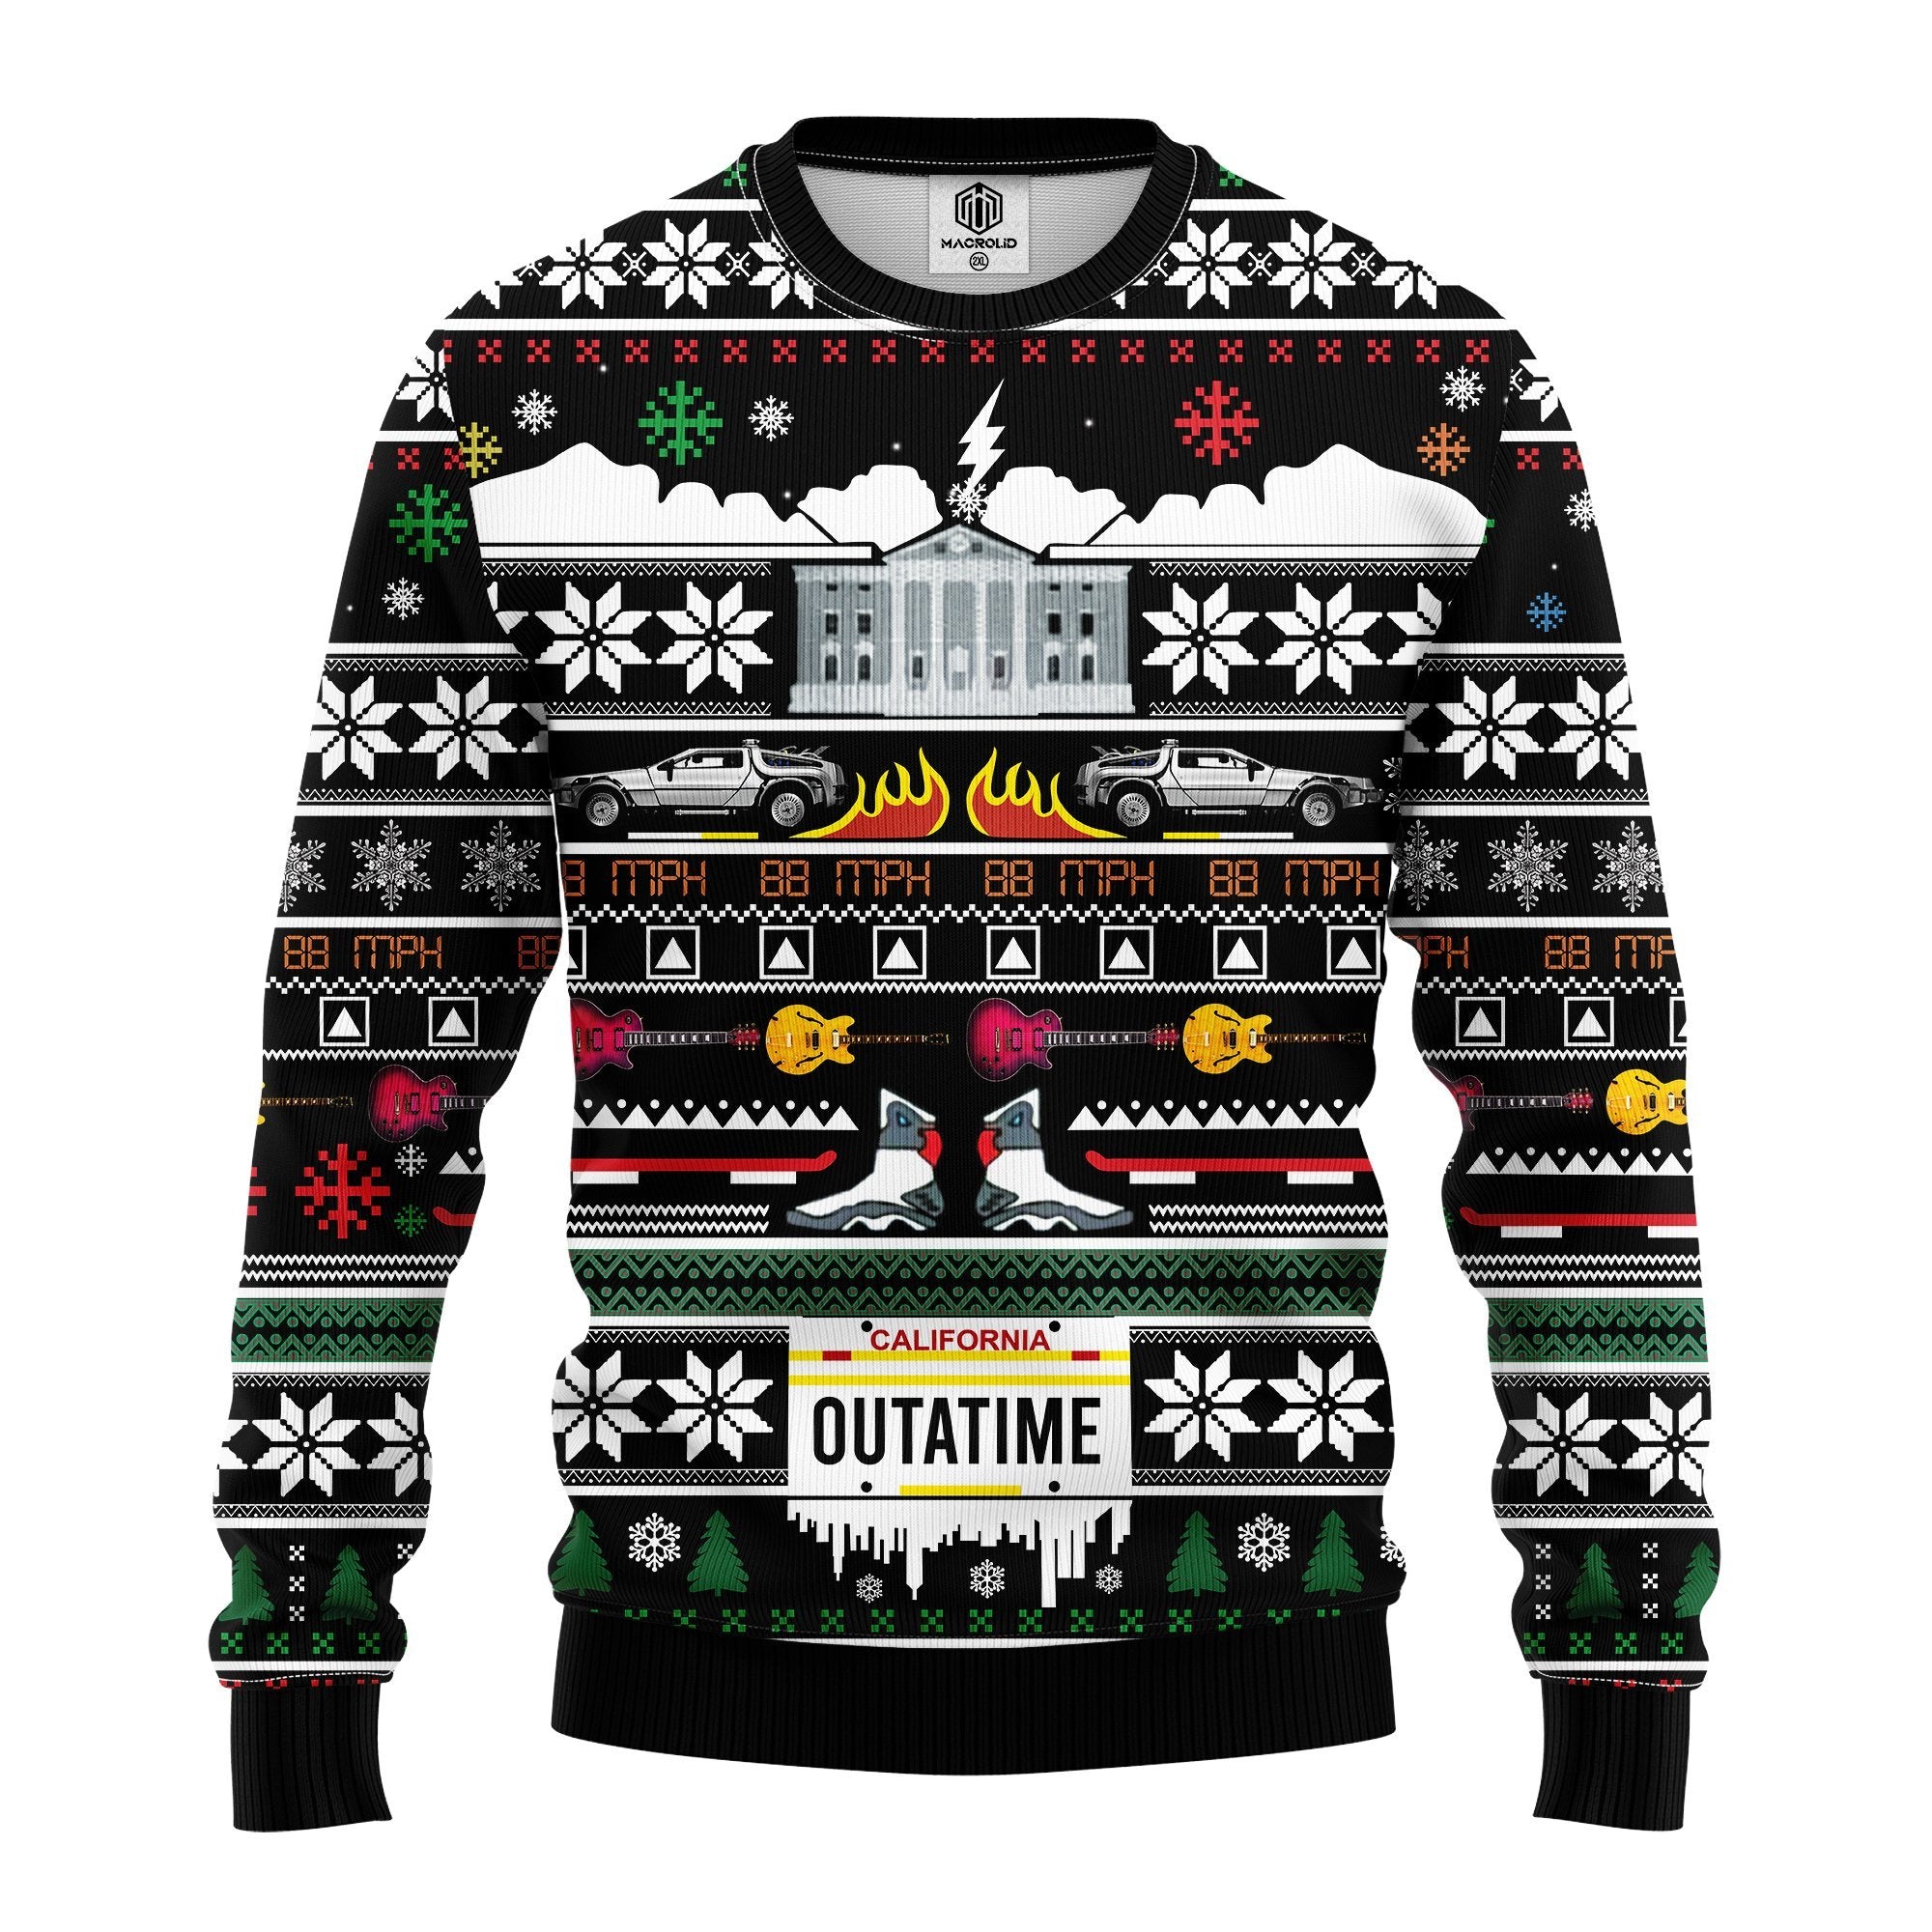 Outatime Ugly Christmas Sweater Amazing Gift Idea Thanksgiving Gift